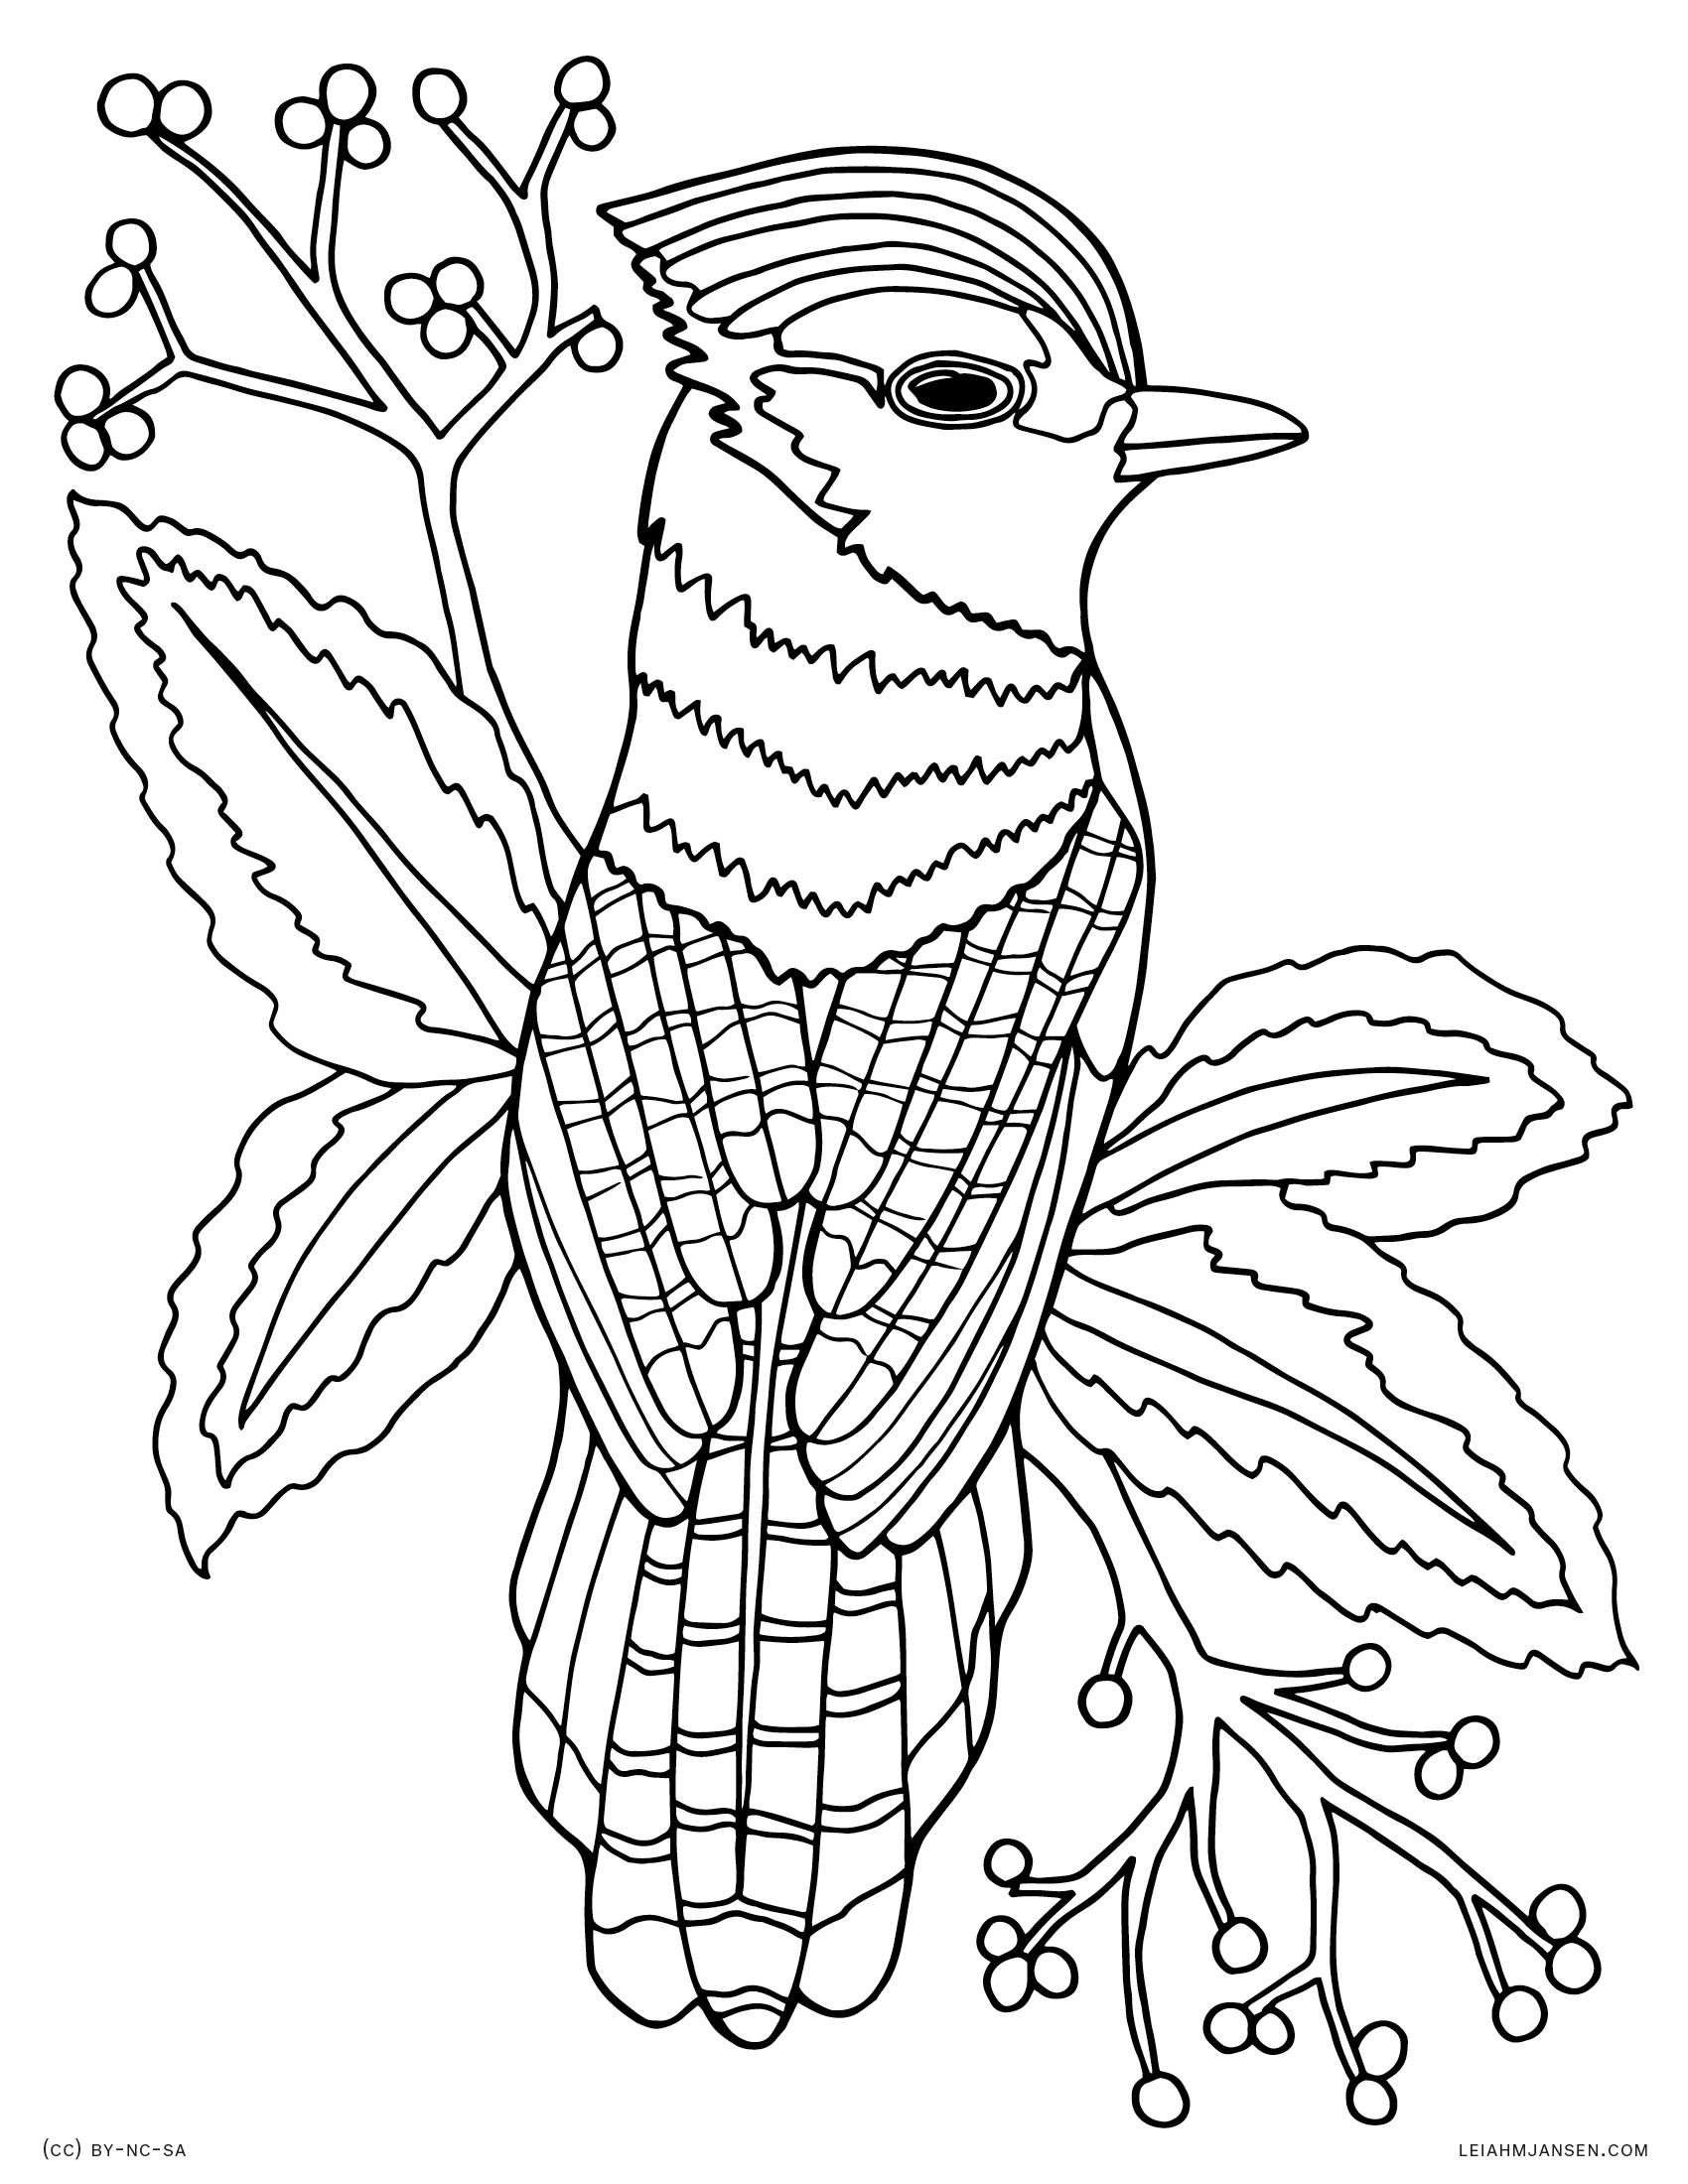 Coloring Pages - Free Coloring Pages Com Printable | Free Printable A to Z